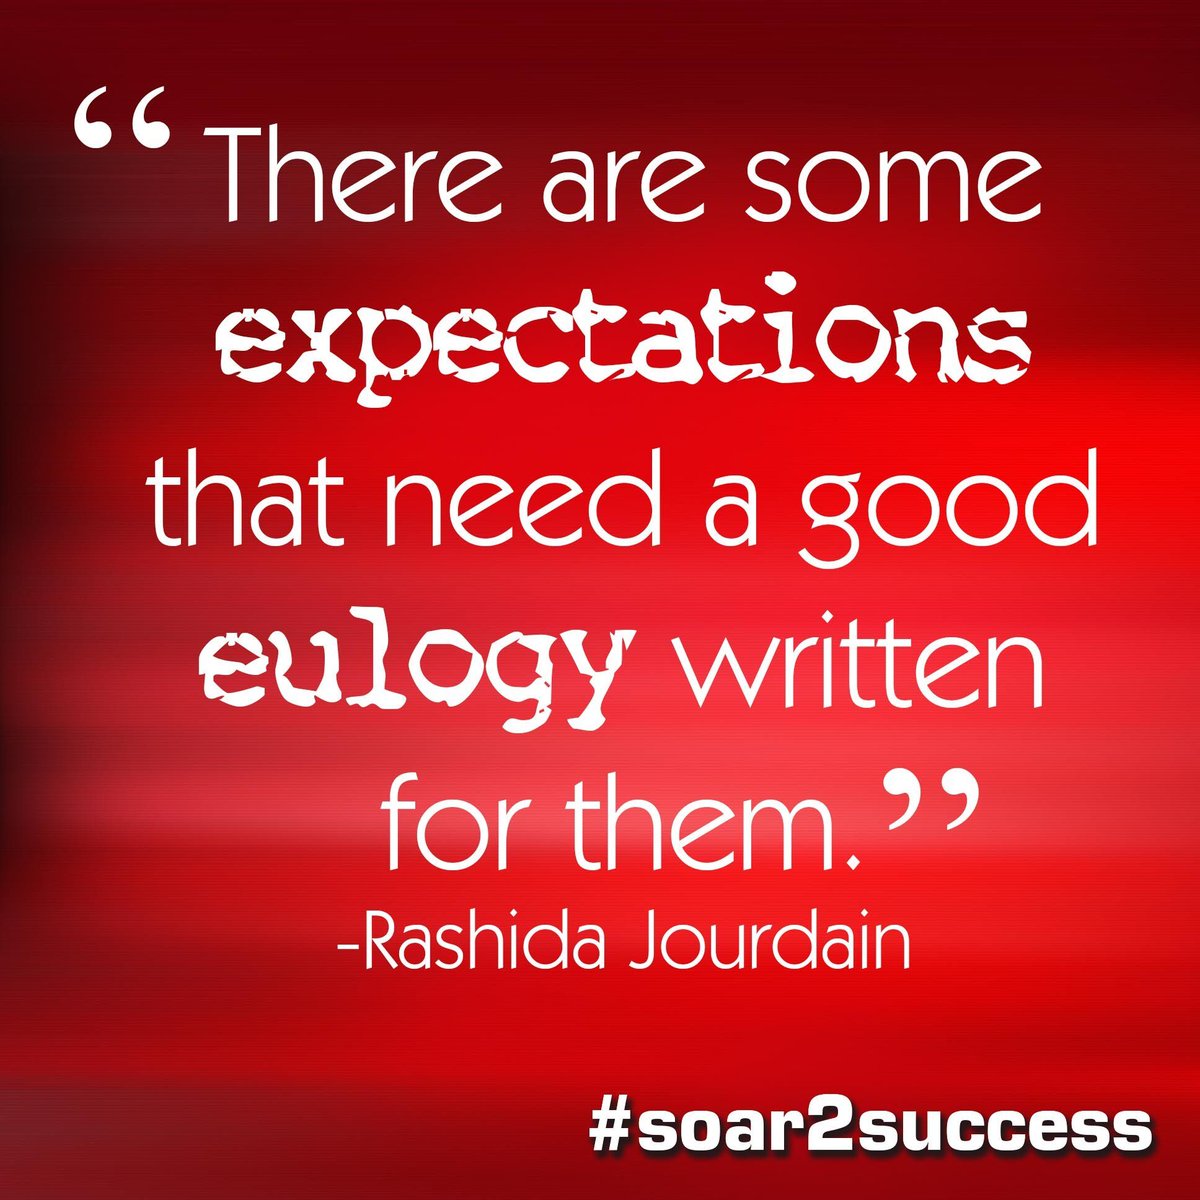 ''There are some expectations that need a good eulogy written for them.'' - Rashida Jourdain #Leadership #Pilotspeaker #Soar2Success